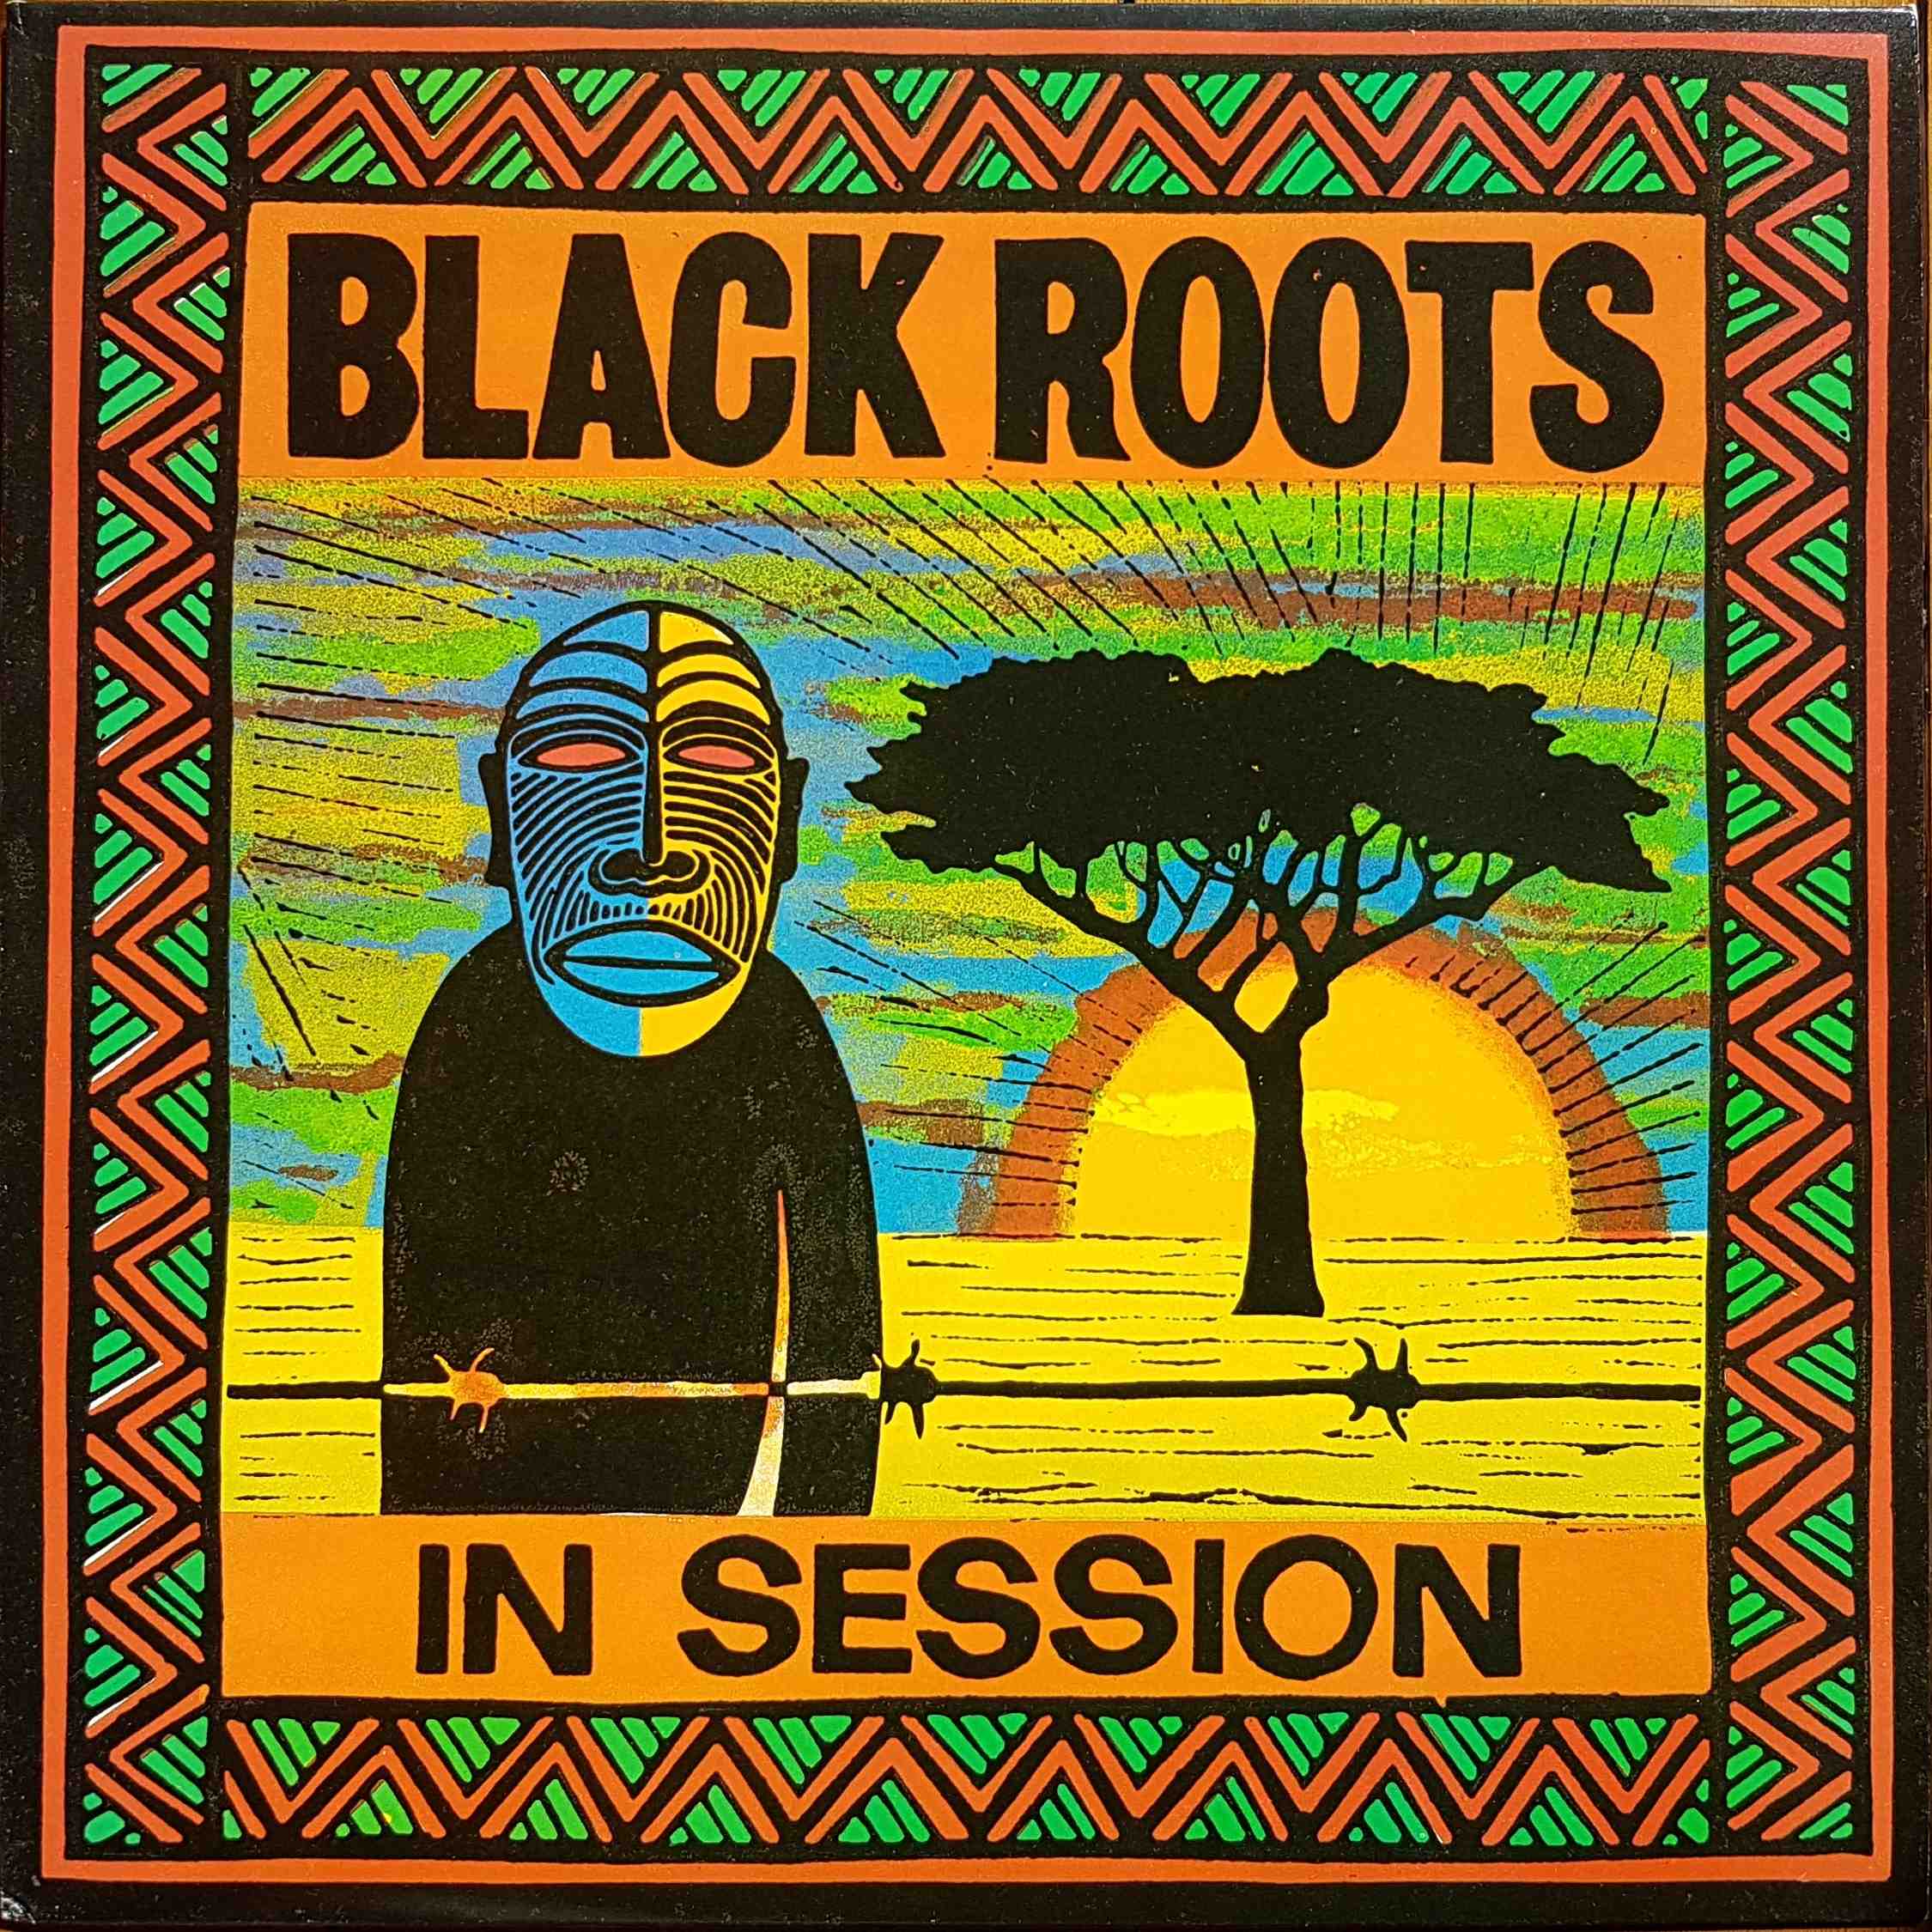 Picture of REC 570 In session - Black Roots by artist Black Roots from the BBC albums - Records and Tapes library